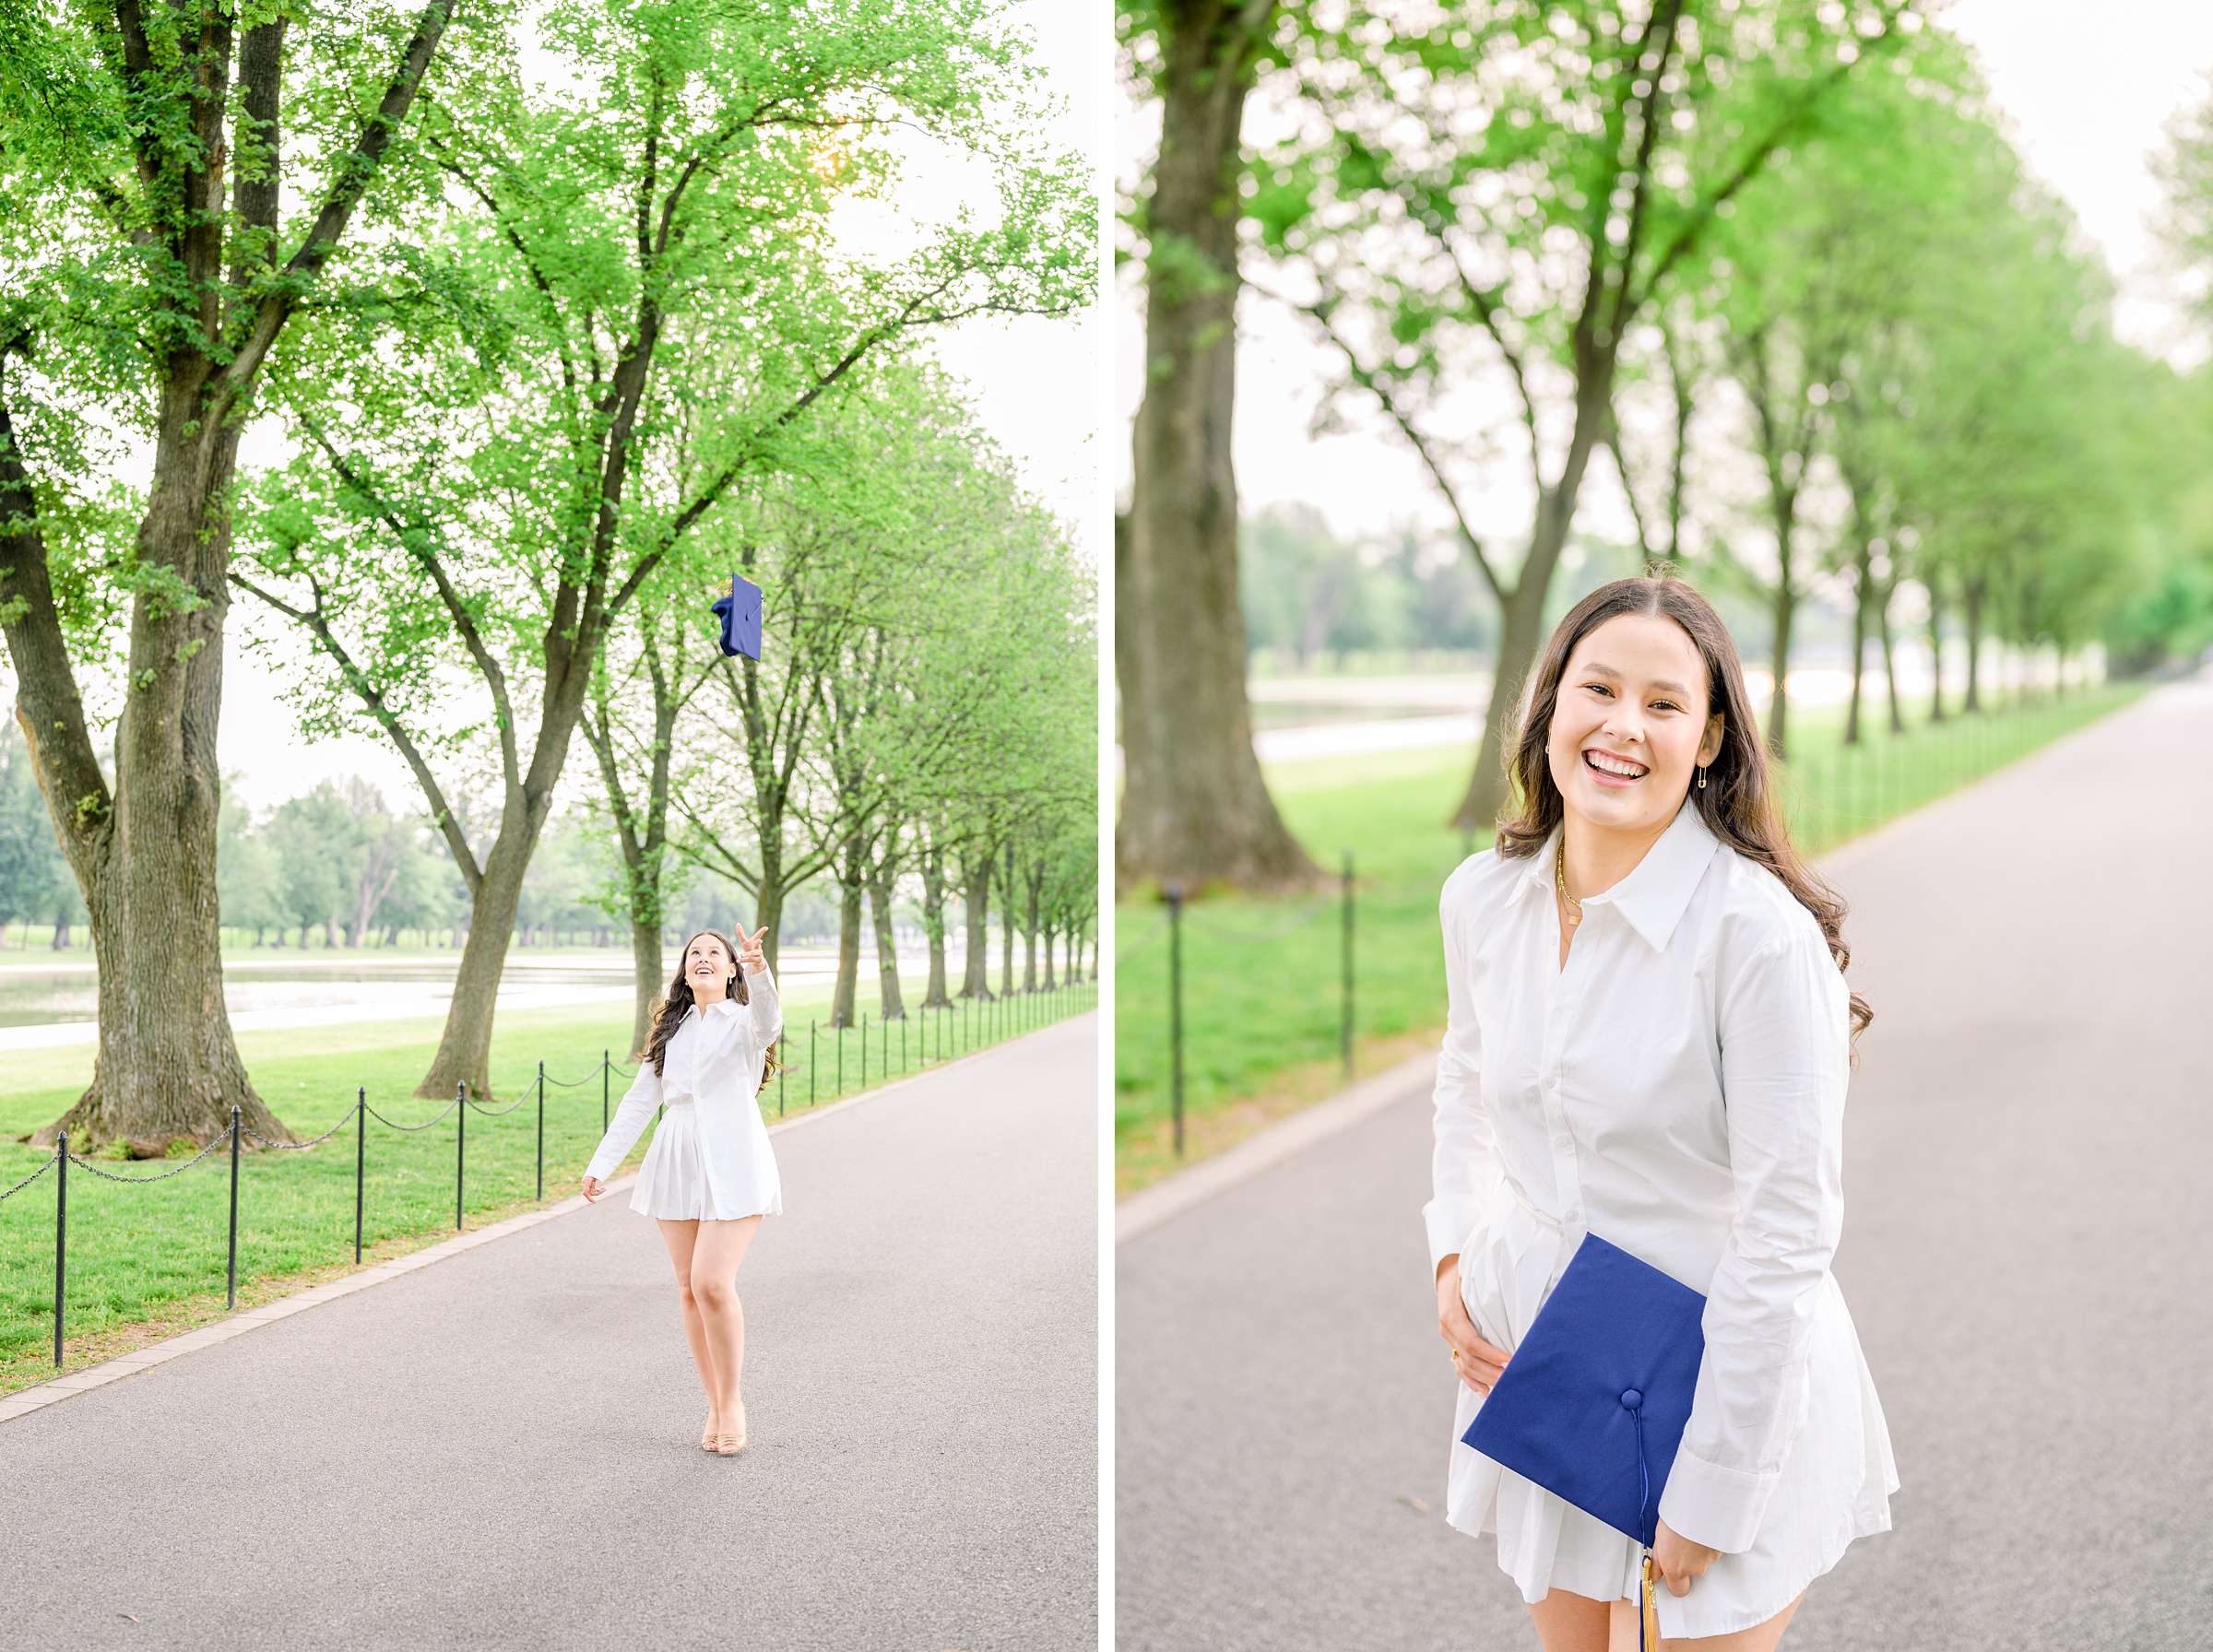 GW Grad Session on the National Mall photographed by Baltimore Photographer Cait Kramer